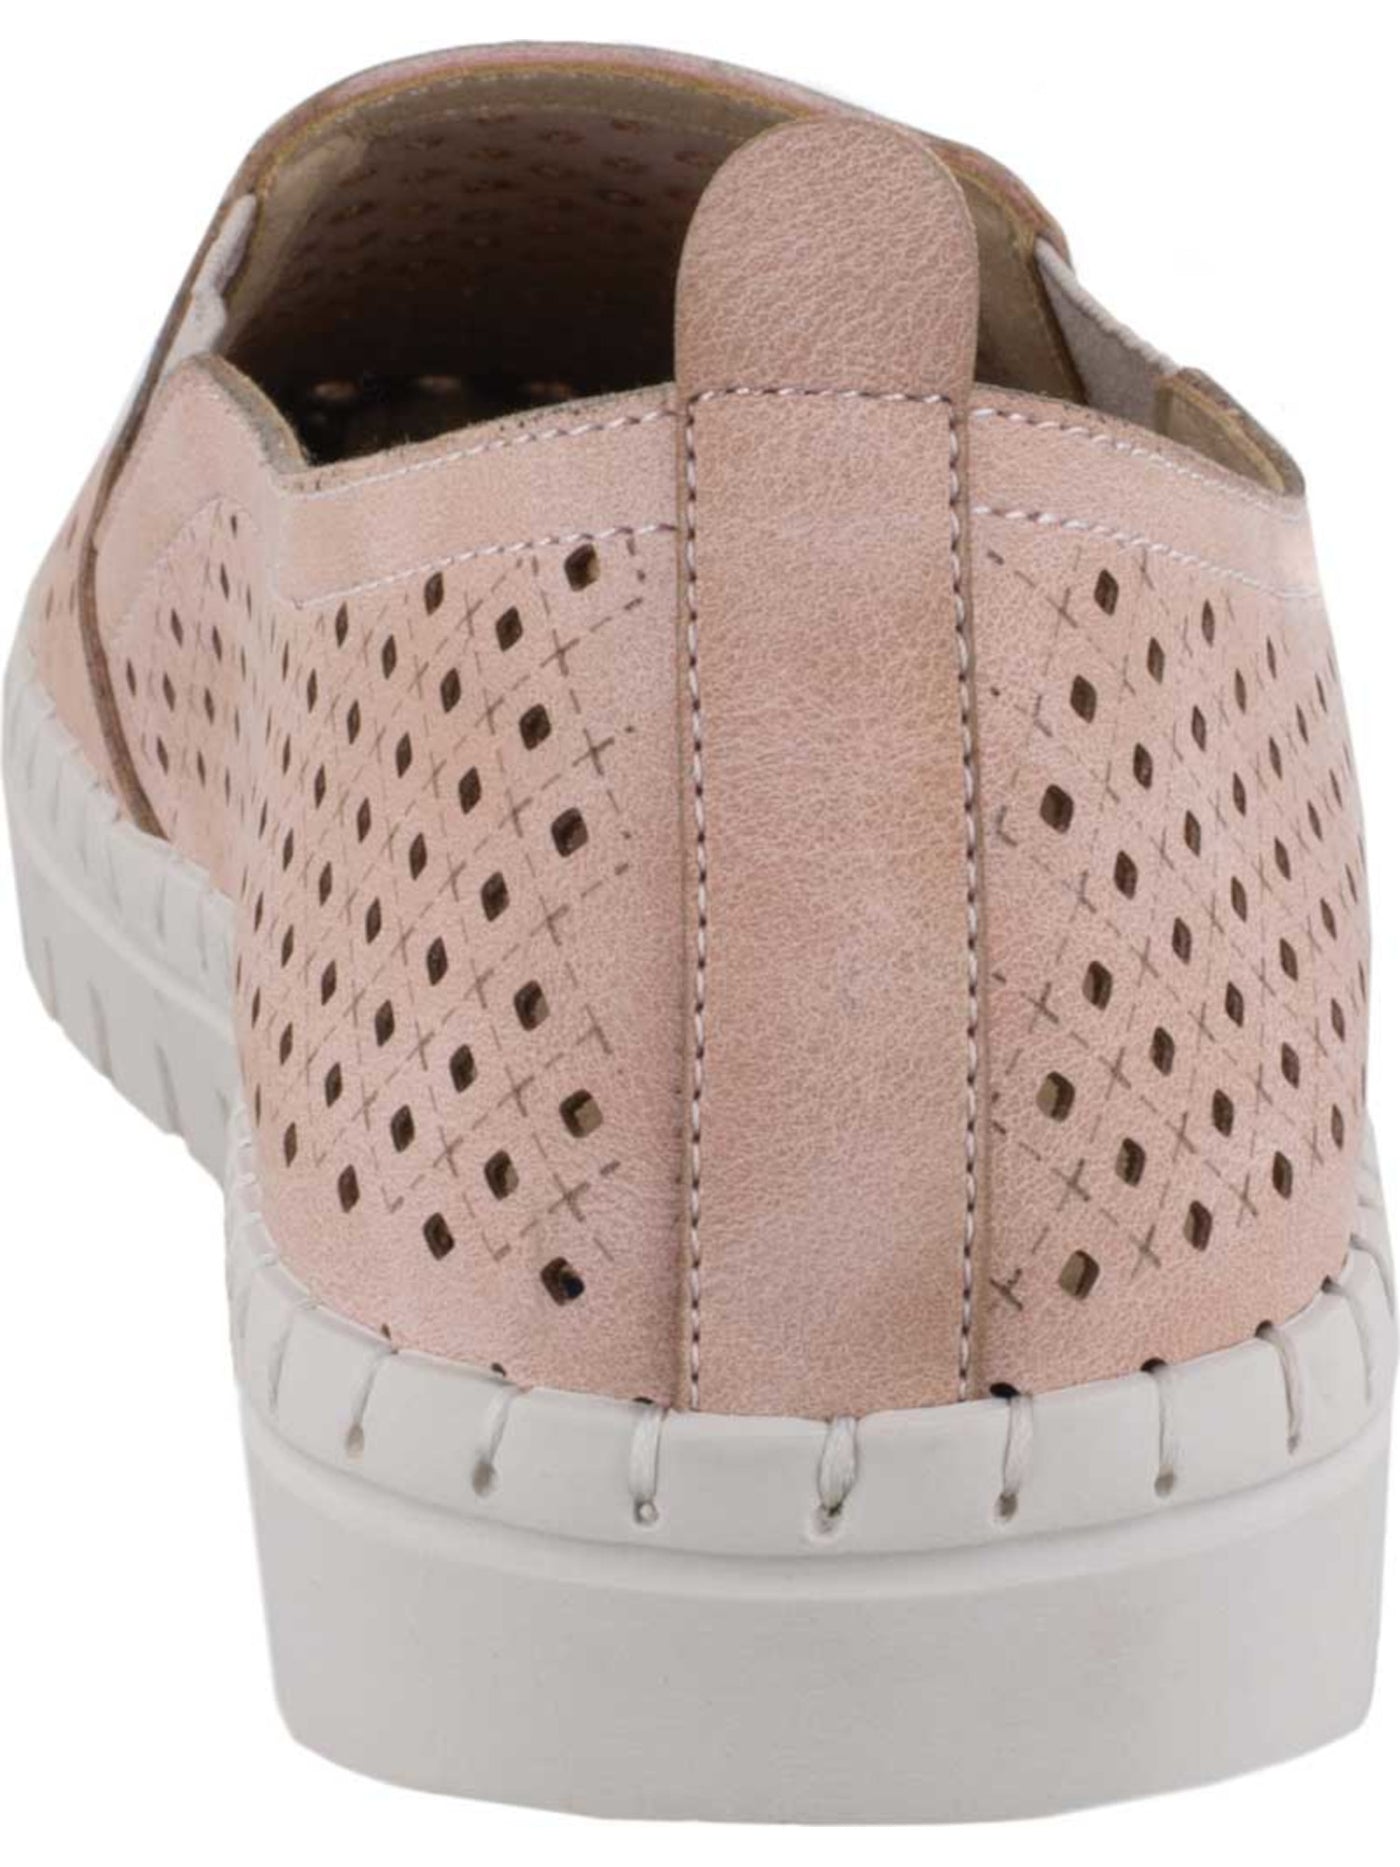 EASY STREET Womens Pink Perforated Twin Gores Padded Stretch Fresh Round Toe Slip On Athletic Sneakers Shoes 7 N